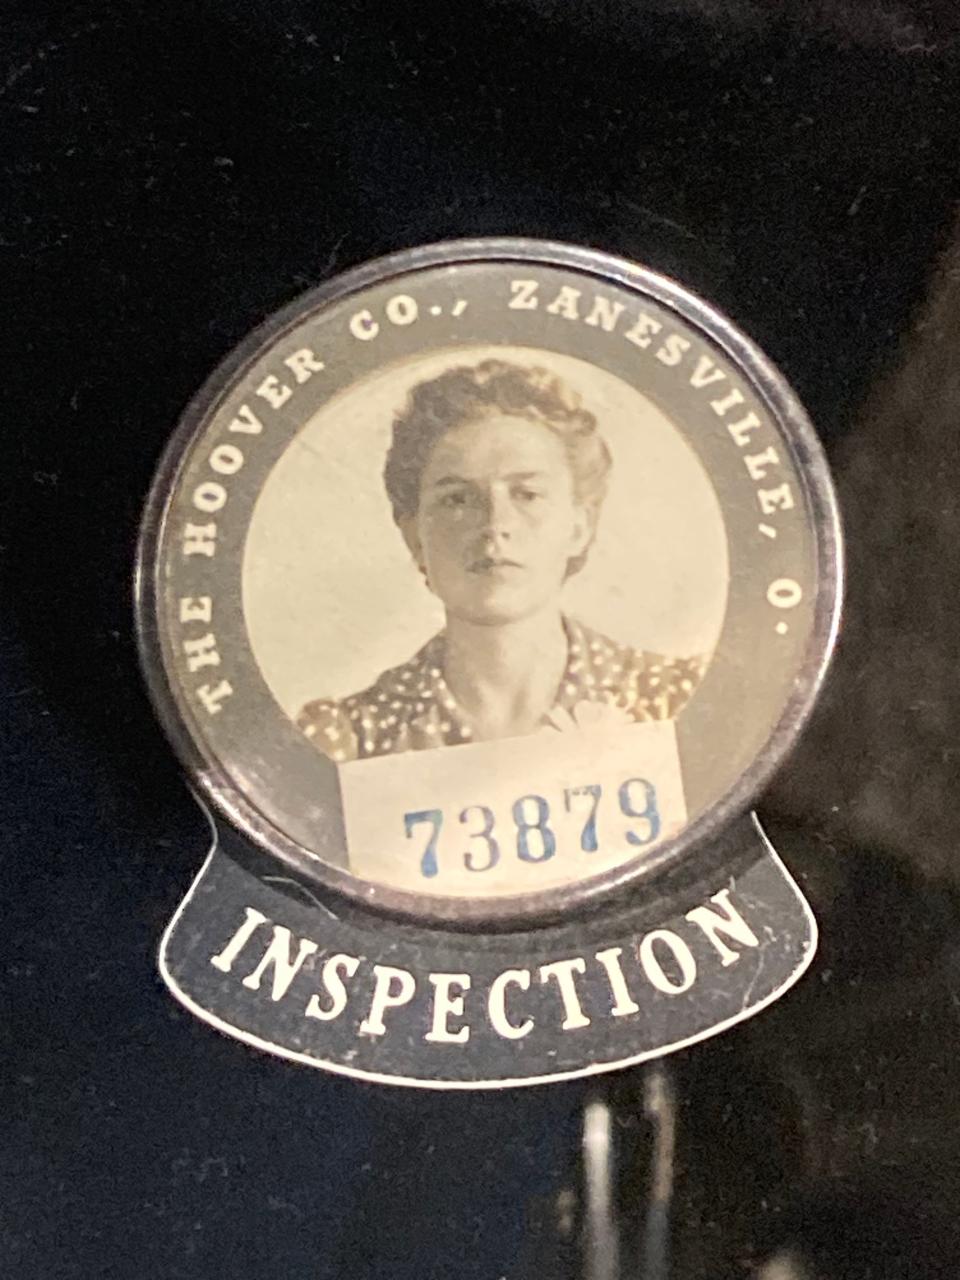 One of the manufacturing jobs women traditionally have held is inspecting materials. This Hoover Company inspector's badge in the Keller Gallery exhibition "Women at Work" is on loan from Hoover Historical Center.